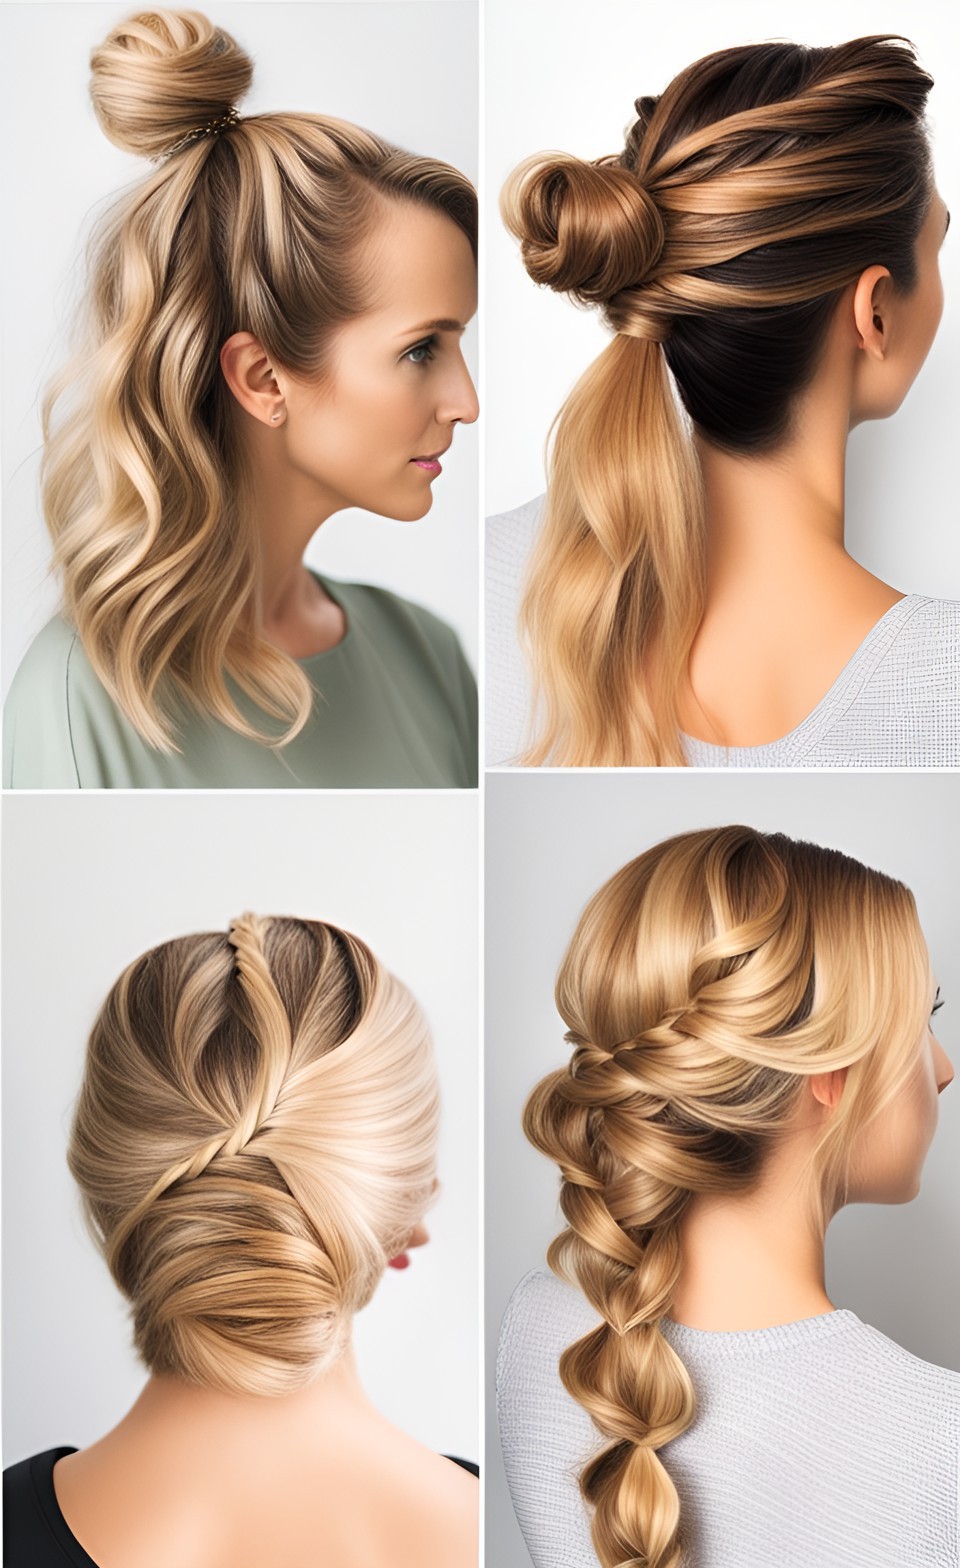 18 Quick and Easy Mom Hairstyles for Every Hair Length